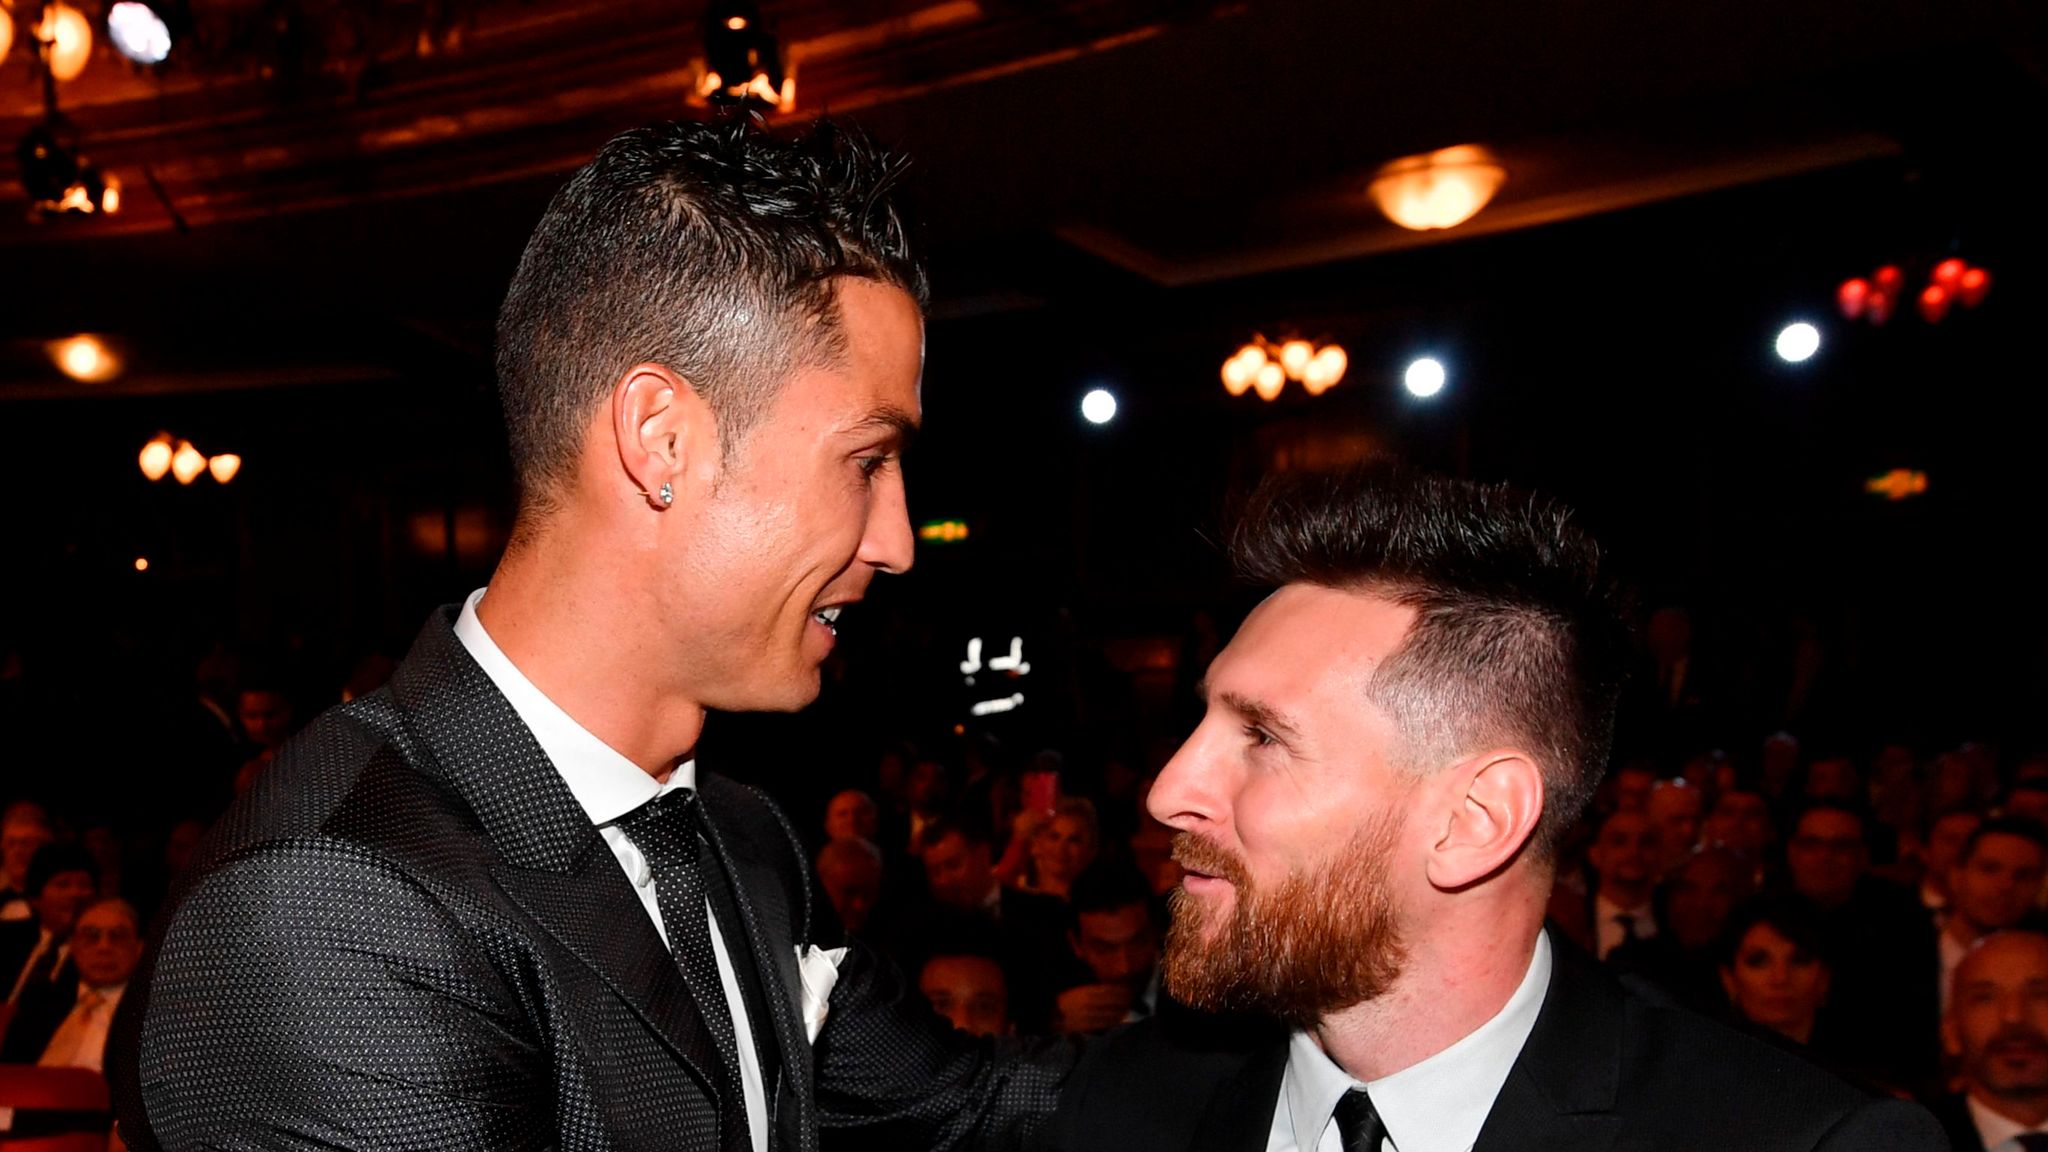 Despite my friendship with Cristiano, I would go for Messi